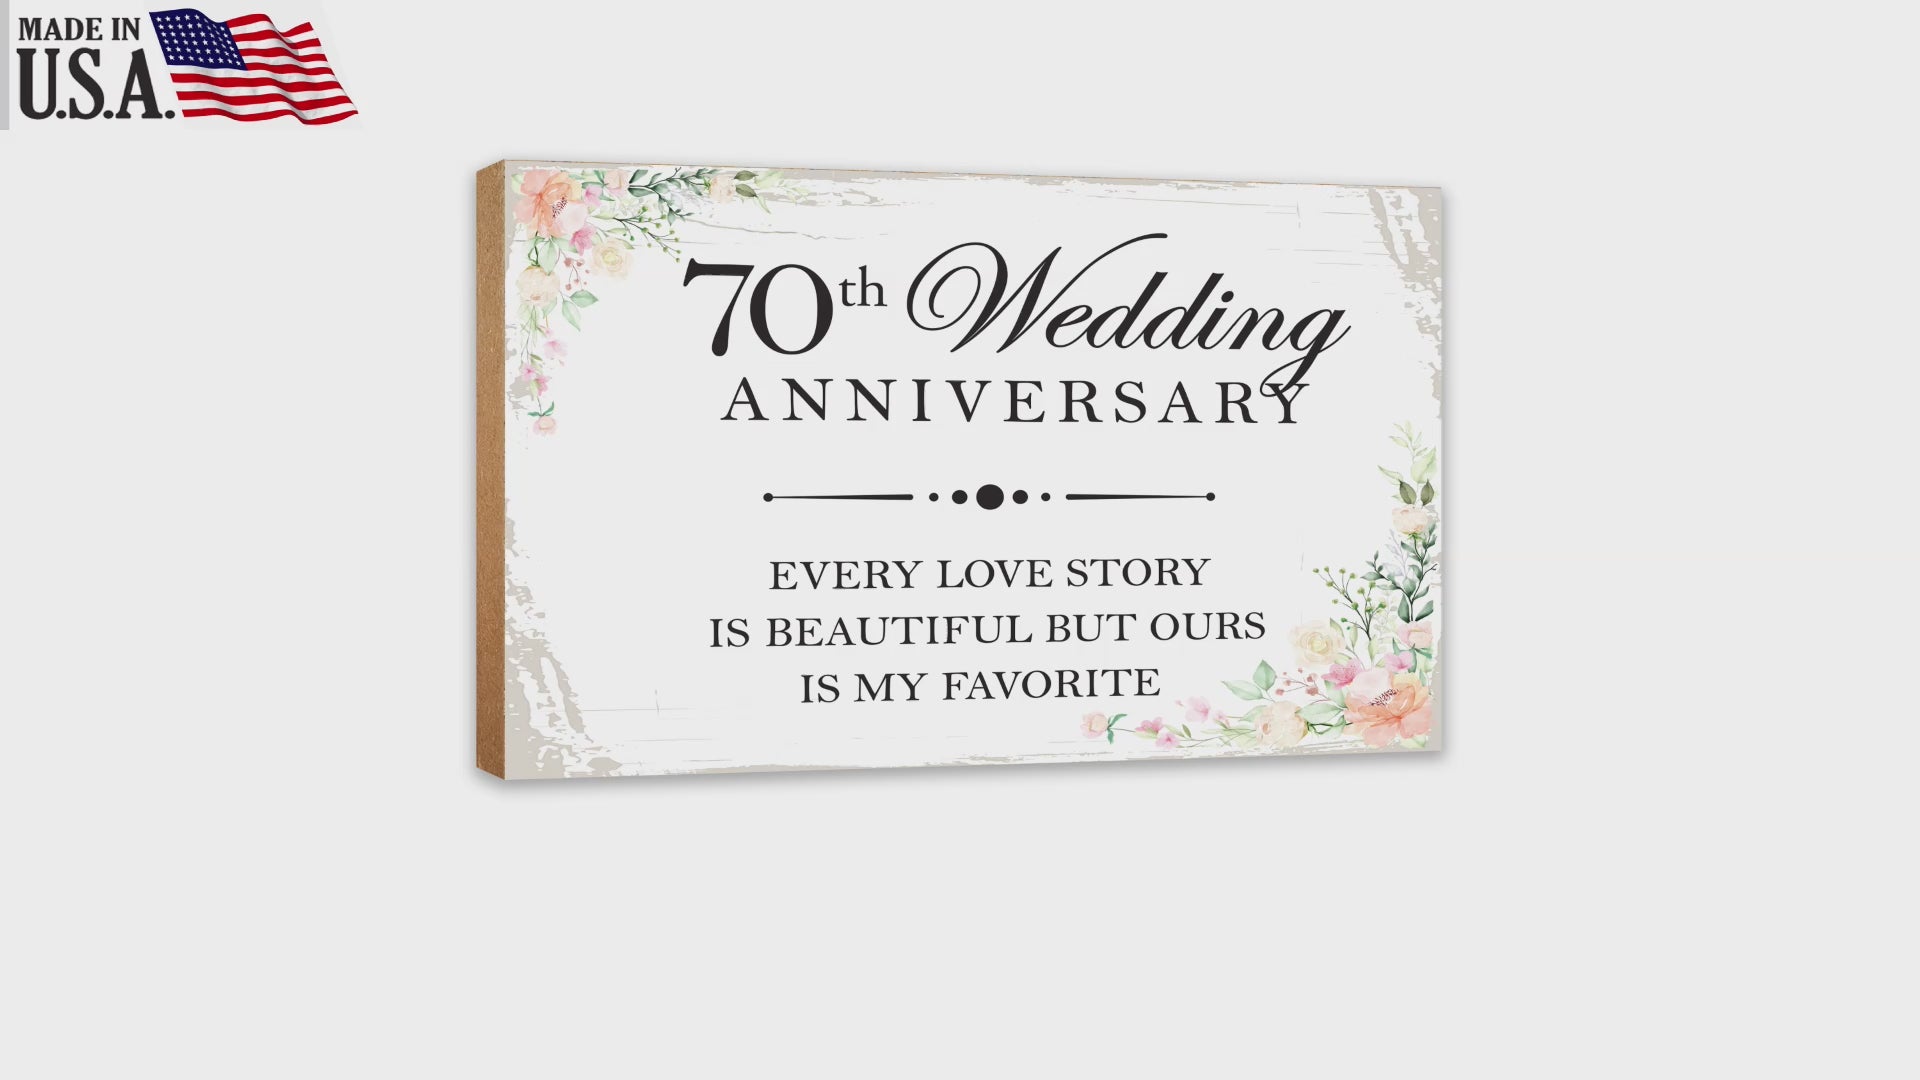 70th Wedding Anniversary Unique Shelf Decor and Tabletop Signs Gift for Couples - Every Love Story